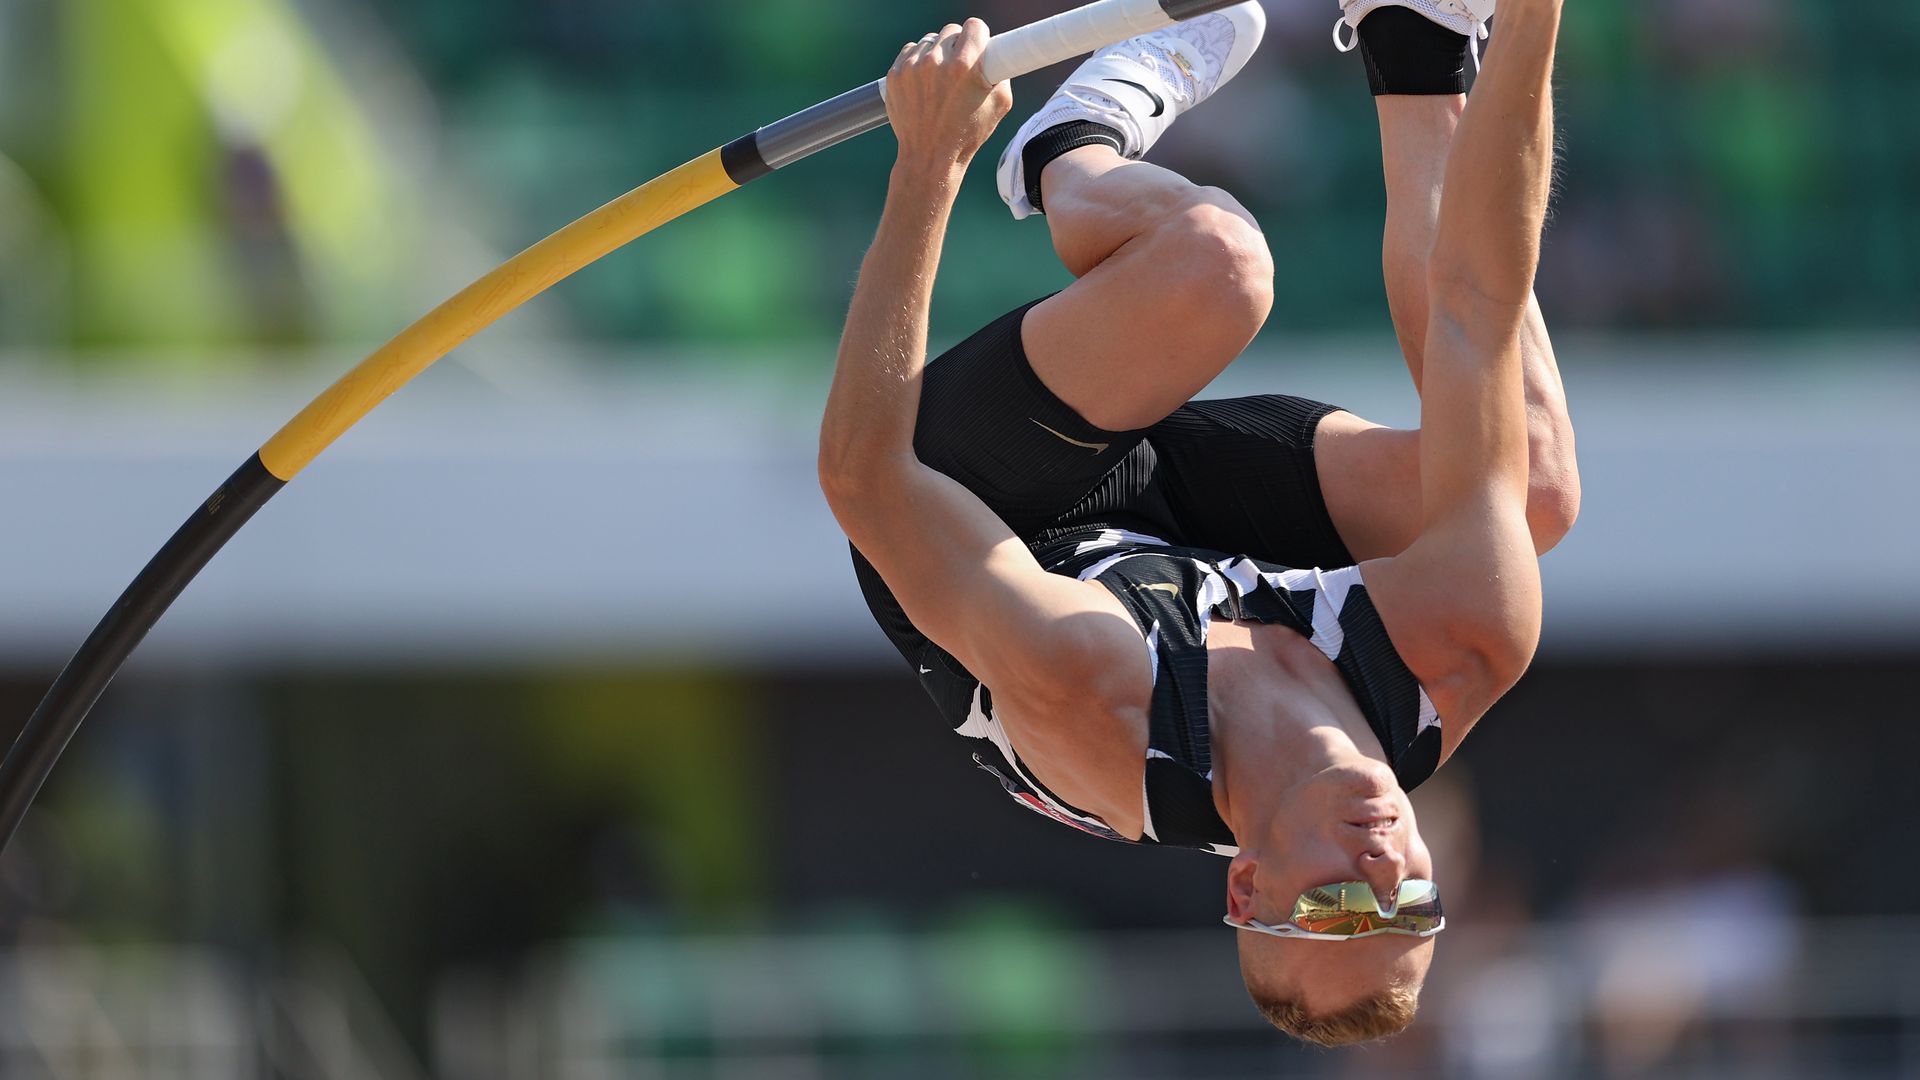 Sam Kendricks competes in the Men's Pole Vault Final during day four of the 2020 U.S. Olympic Track & Field Team Trials at Hayward Field on June 21, 2021 